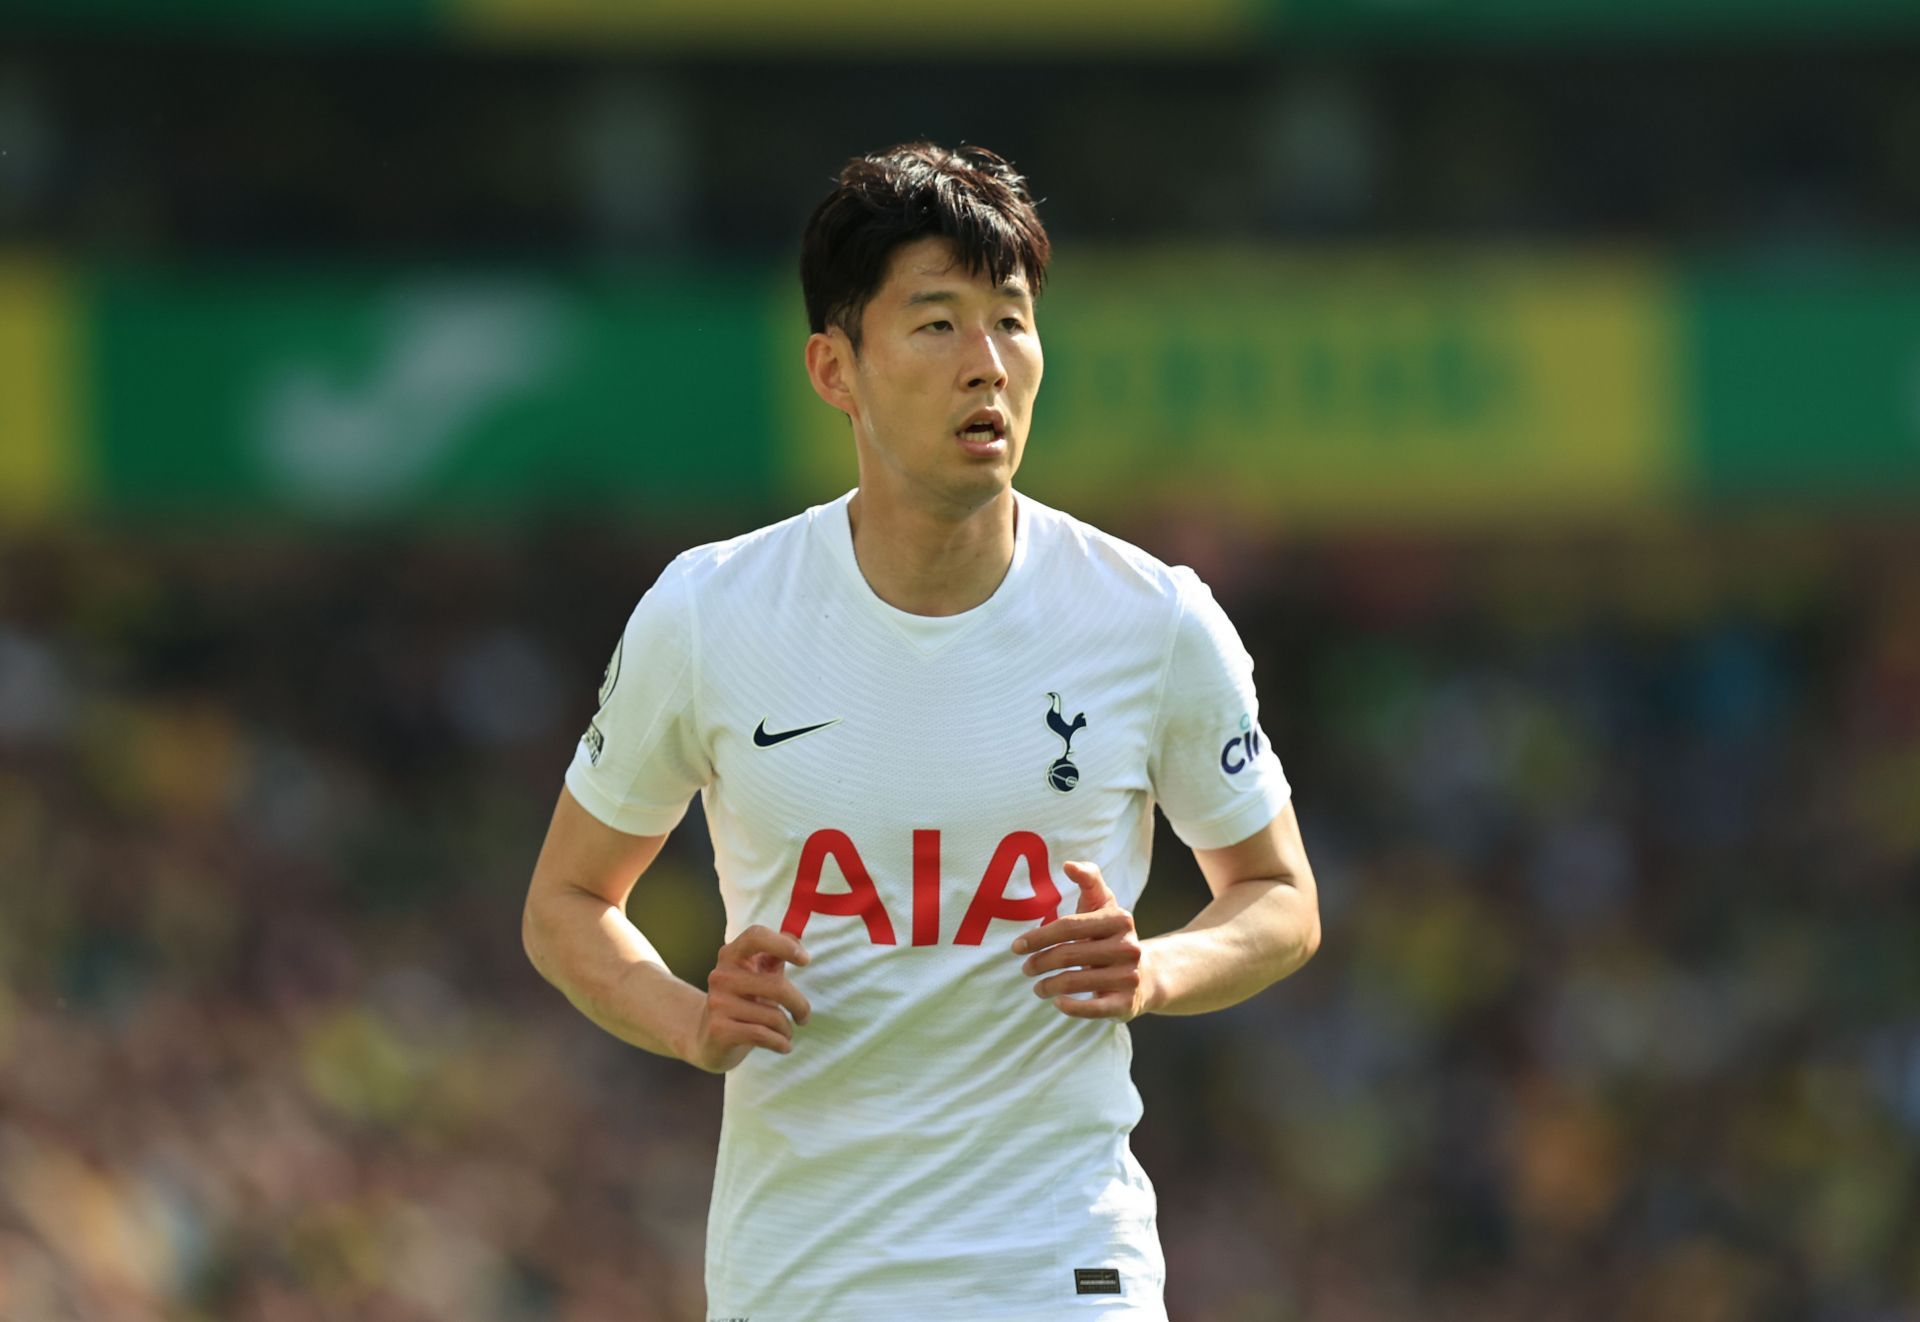 Son Heung-Min in action for Tottenham Hotspur against Norwich City